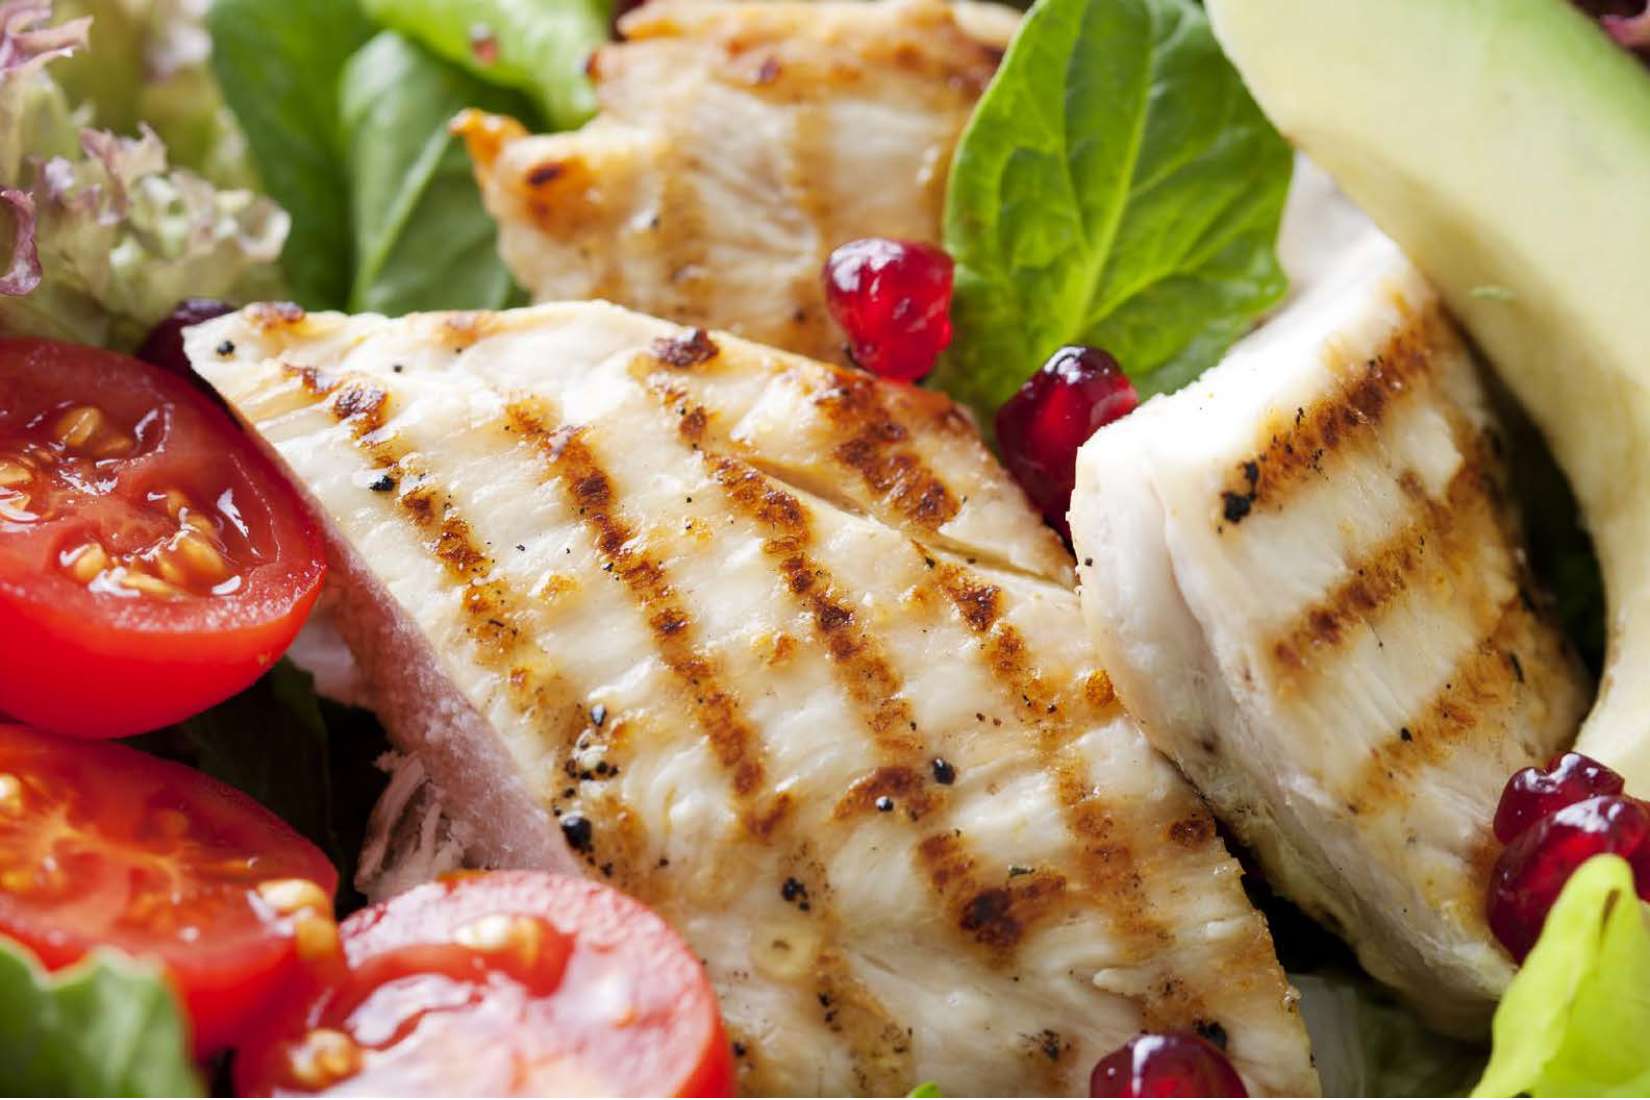 Silver Source® All Natural, Ready-to-Cook, IQF Boneless, Skinless Chicken Breasts with Rib Meat